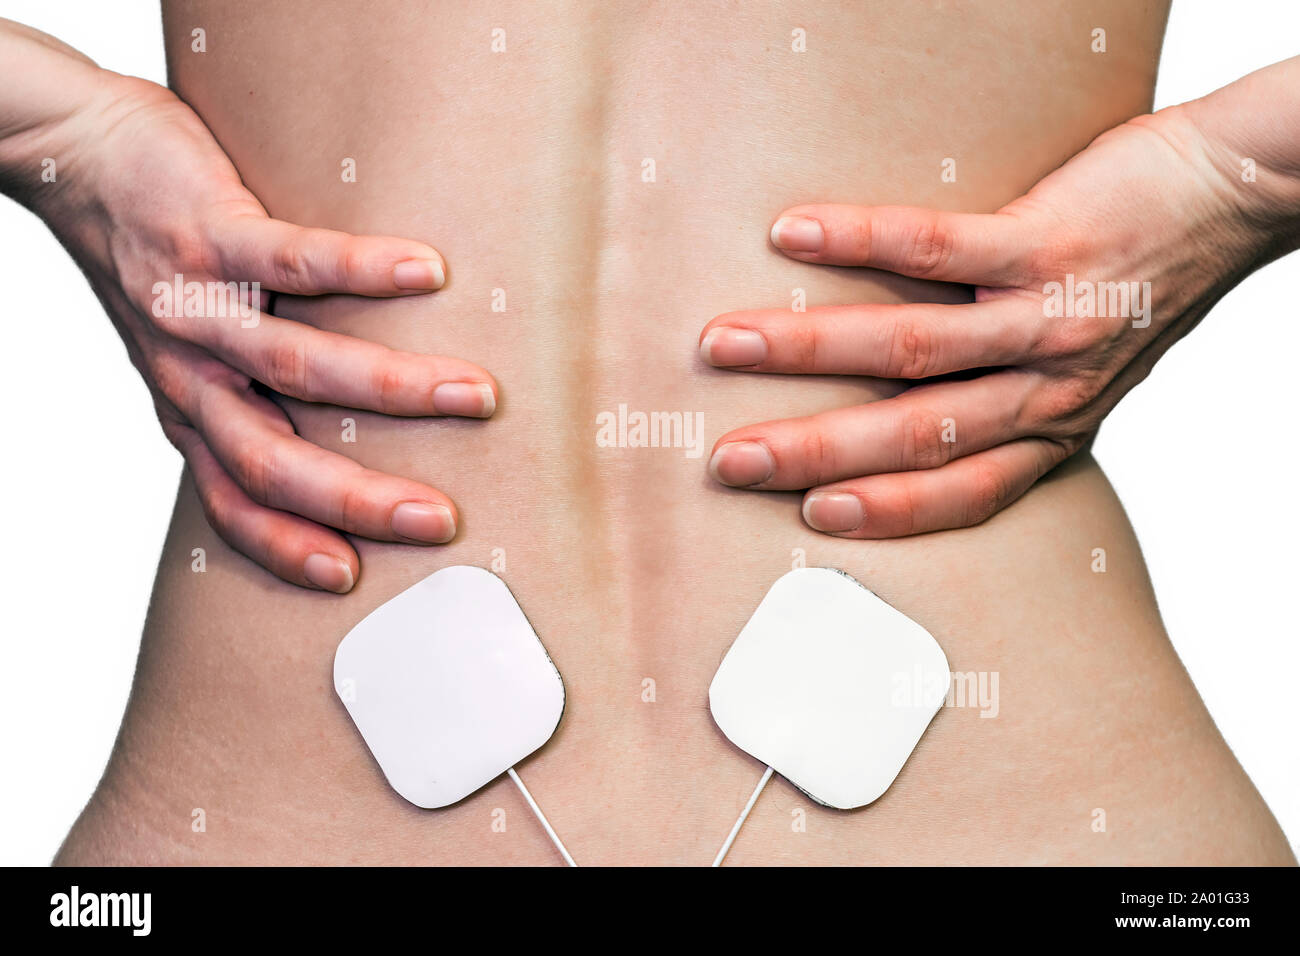 30+ Electrotherapy Machine Stock Photos, Pictures & Royalty-Free